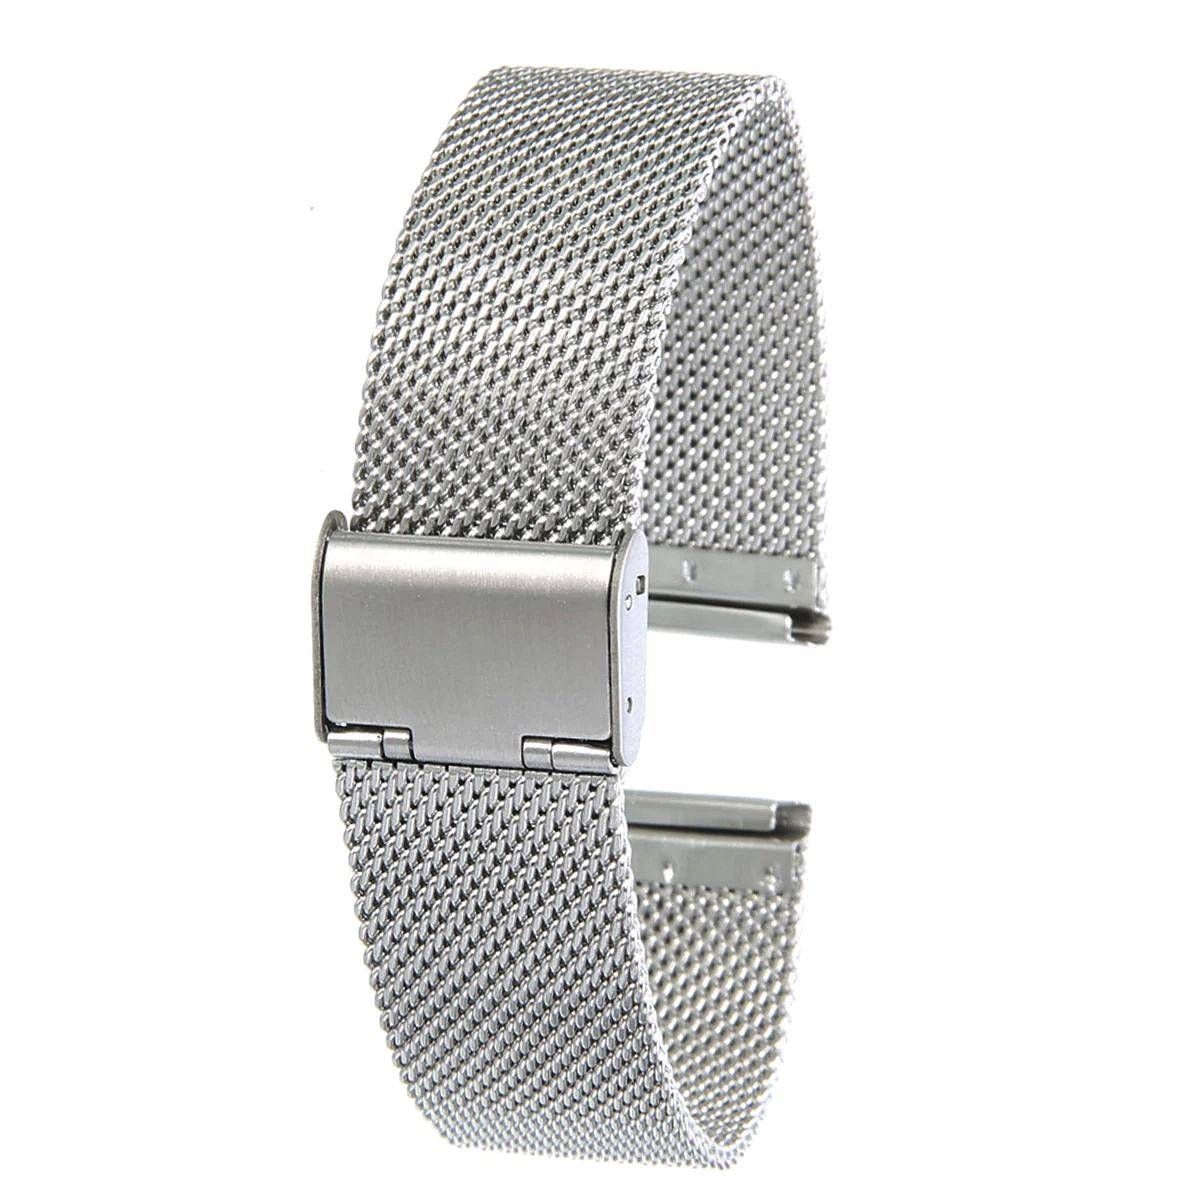 Stainless Steel Mesh Watchband Folding Clasp Strap Bracelet for